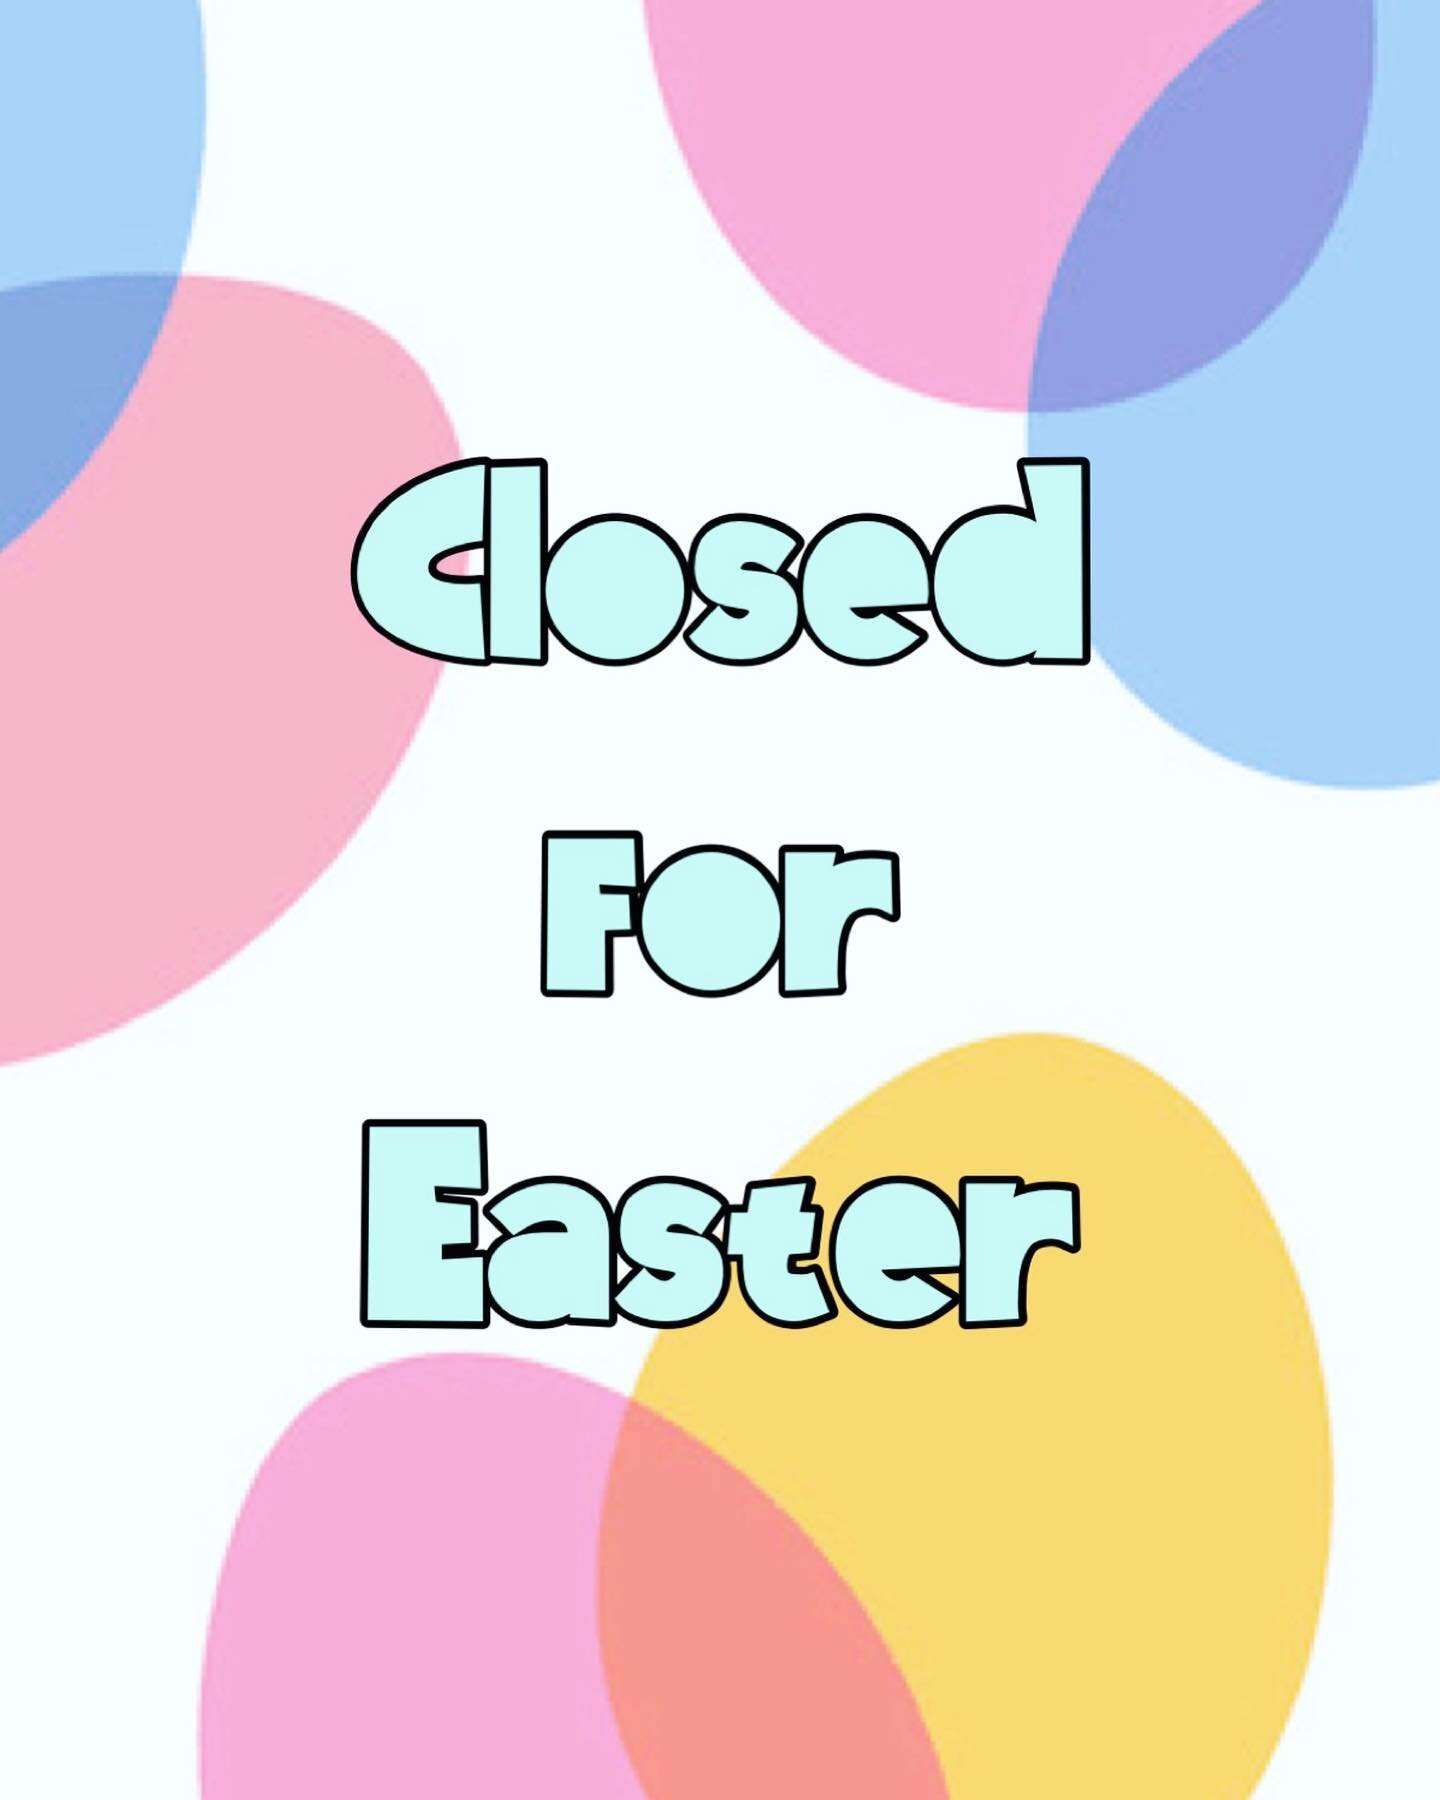 We will be closed Easter Sunday to spend the day with our families and friends. We hope the Easter bunny is good to you this year! P.S we are extending our sale one more day 😉 tomorrow will be the last day! Come take advantage!